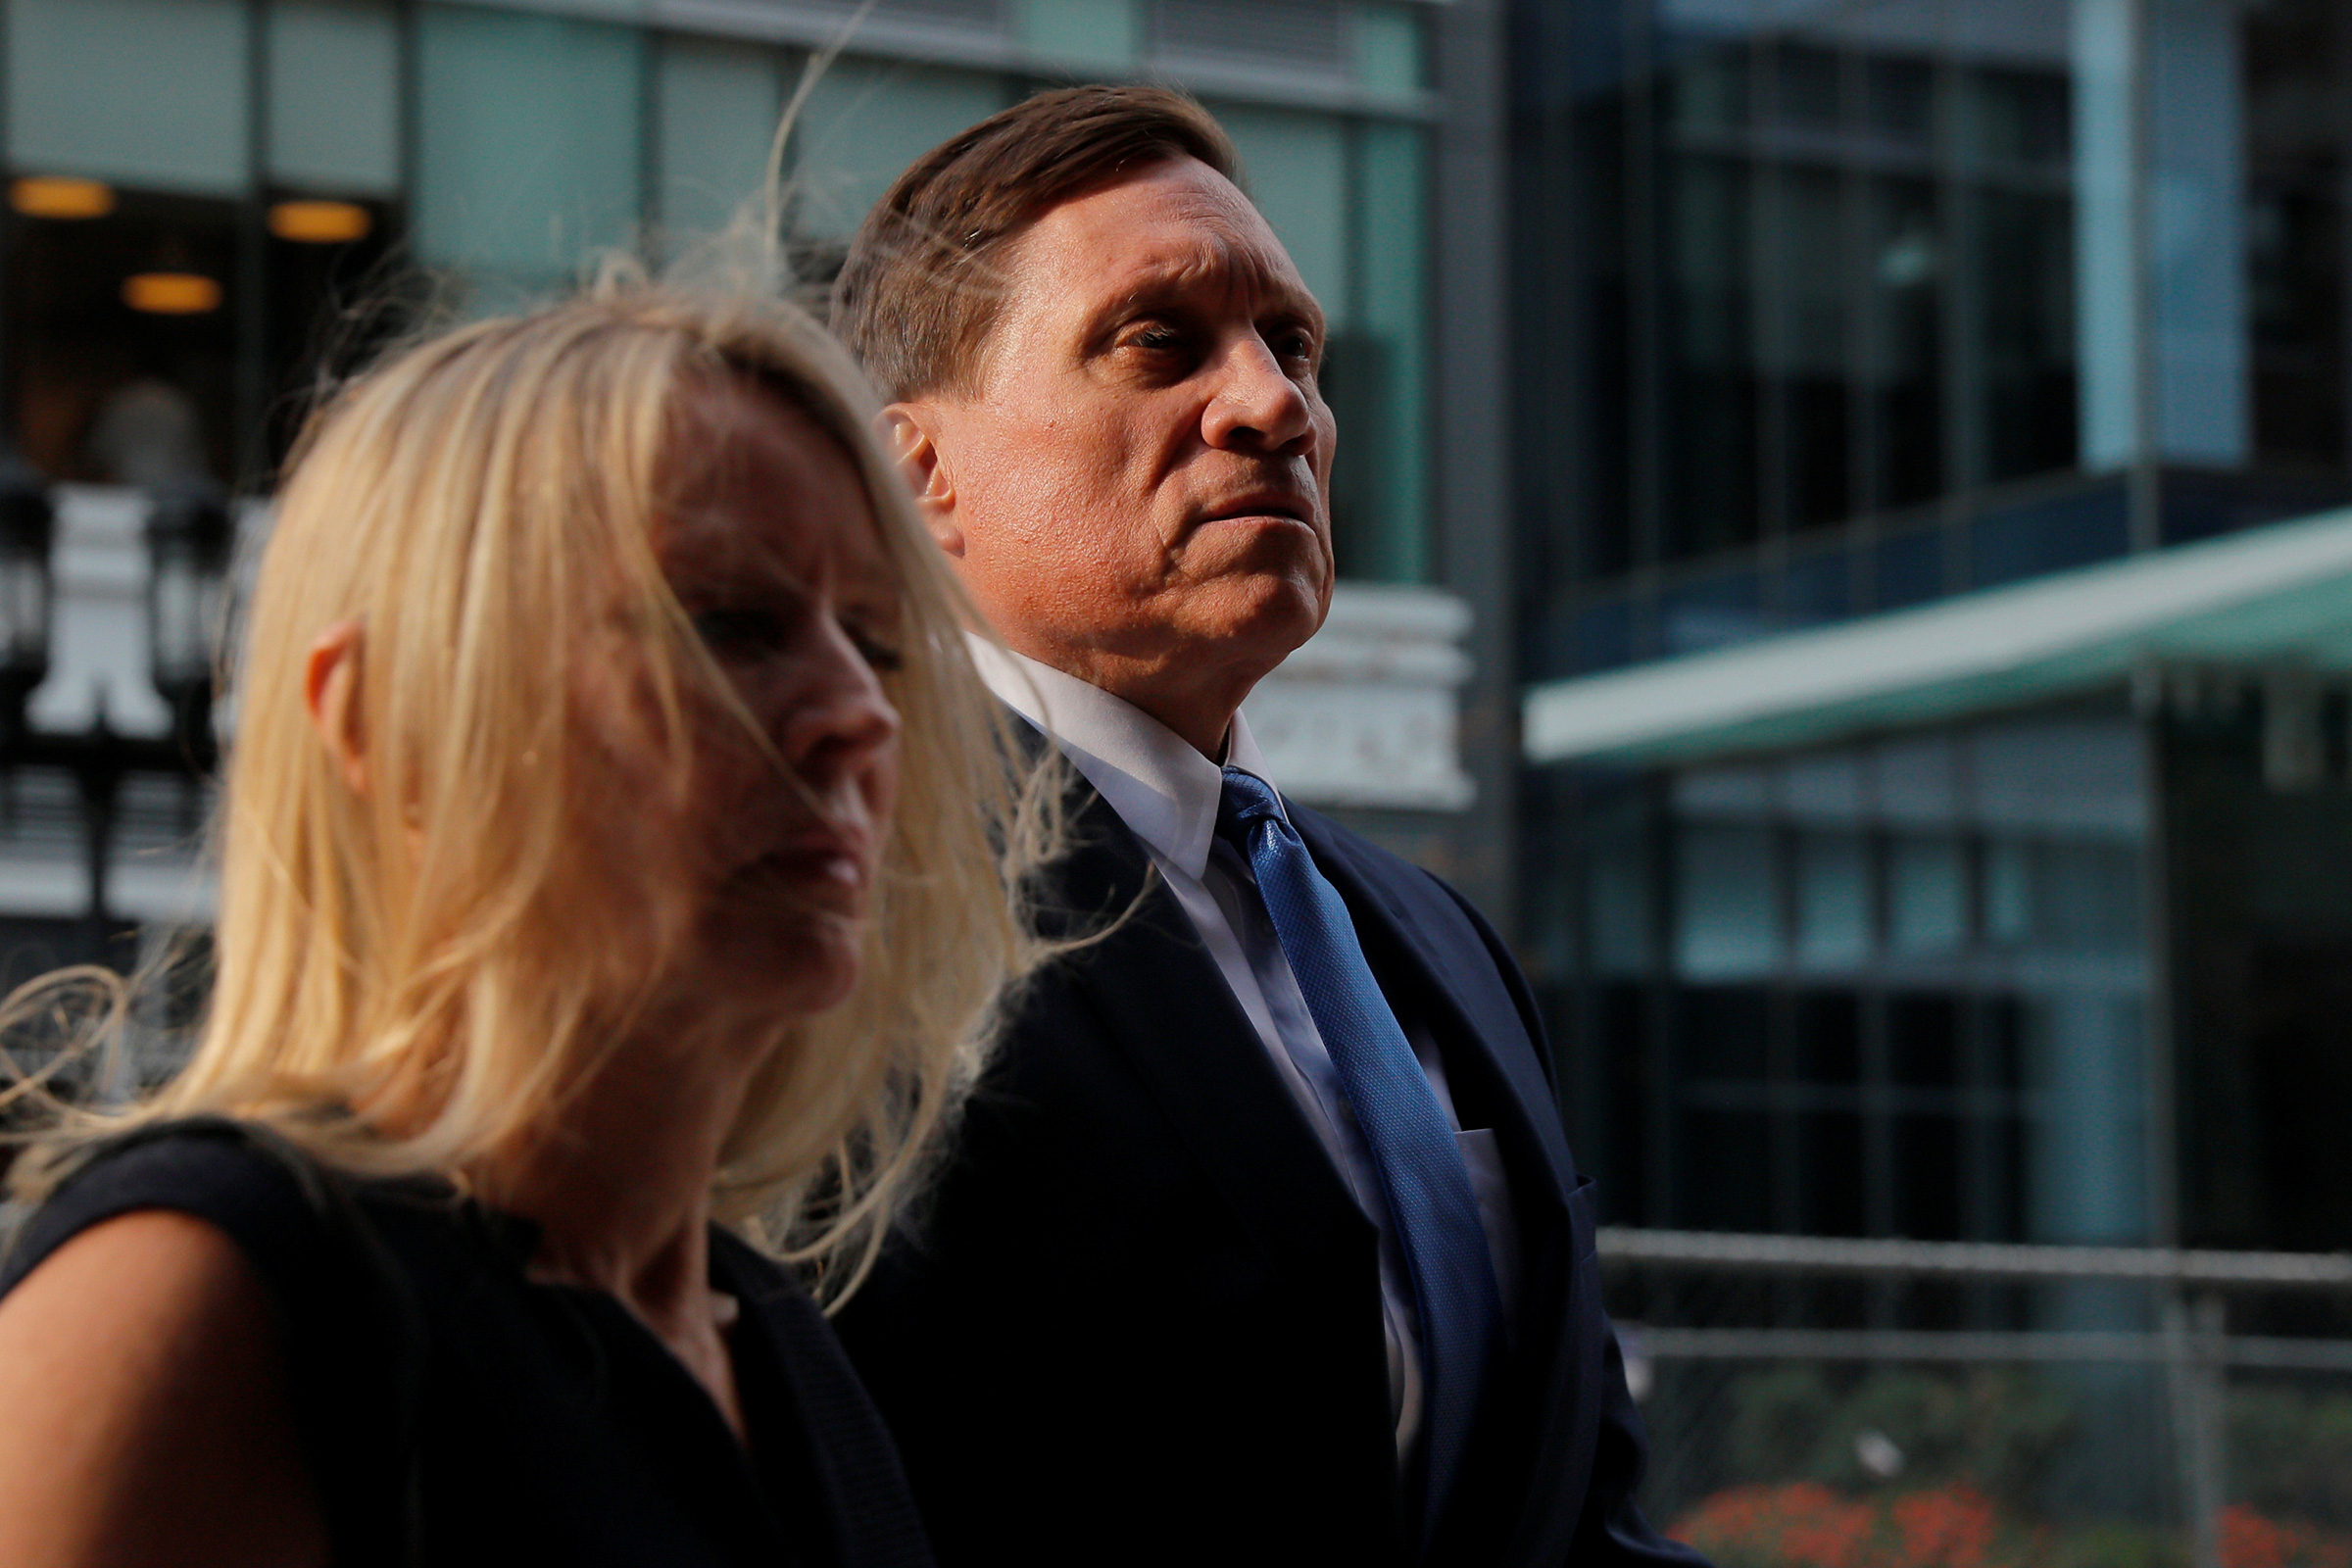 Private equity firm founder John Wilson, charged with participating in a scheme to pay bribes to fraudulently secure the admission of his children to top schools, arrives at federal court for the first day of jury selection in the first trial to result from the U.S. college admissions scandal, which has resulted in dozens of celebrities, executives and coaches facing criminal charges, in Boston, Massachusetts, U.S., September 8, 2021. (Brian Snyder—Reuters)